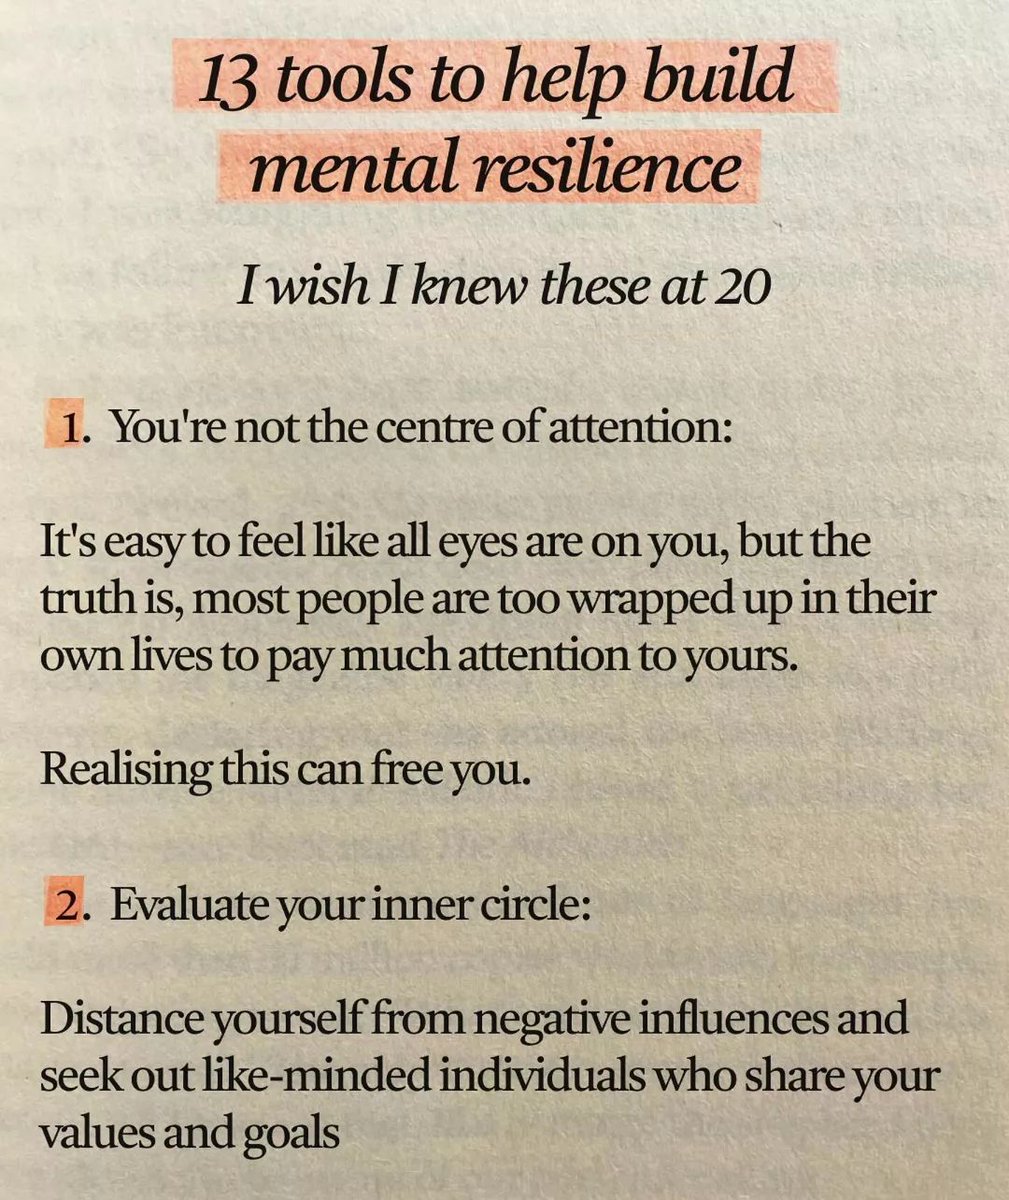 13 tools to help build mental resilience:

1-2